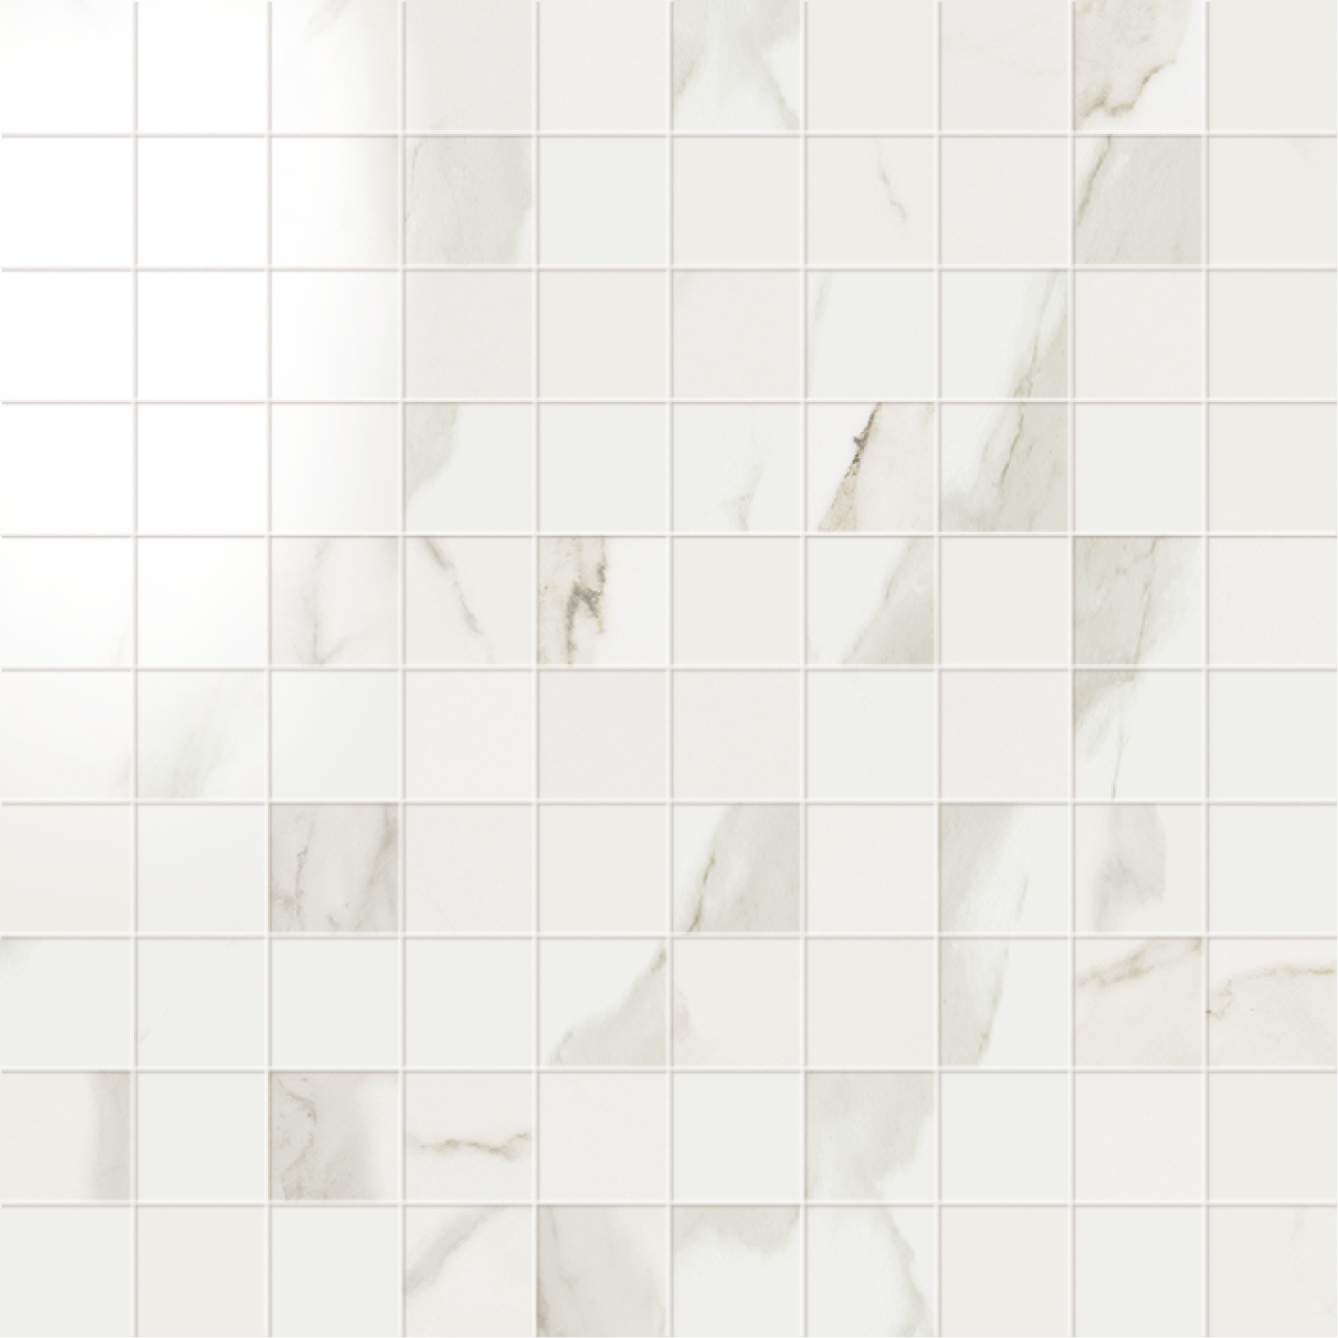 1 x 1 Muse Statuario High Polished porcelain mosaic (SPECIAL ORDER ONLY)